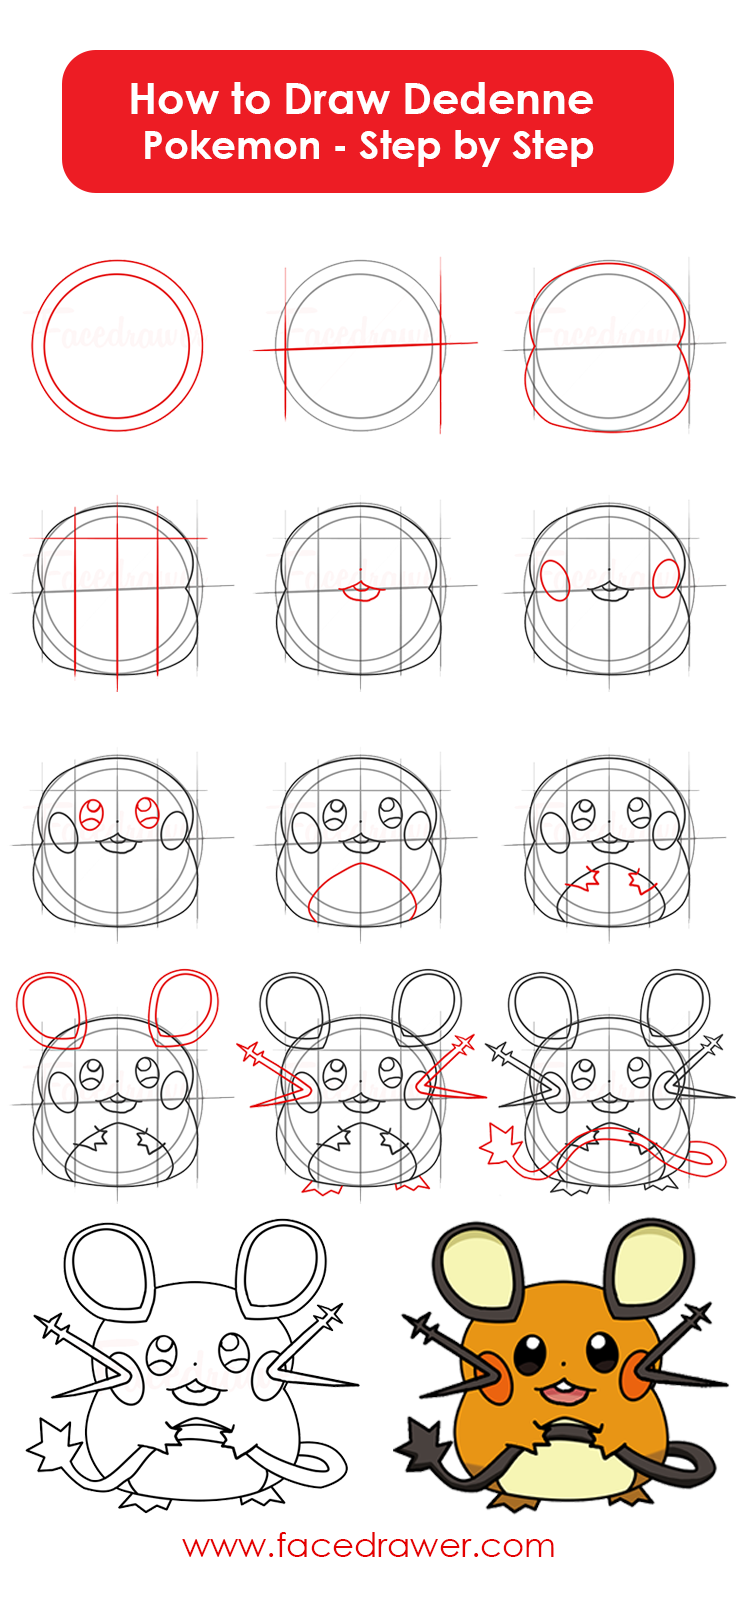 how-to-draw-dedenne-pokemon-step-by-step-infographic